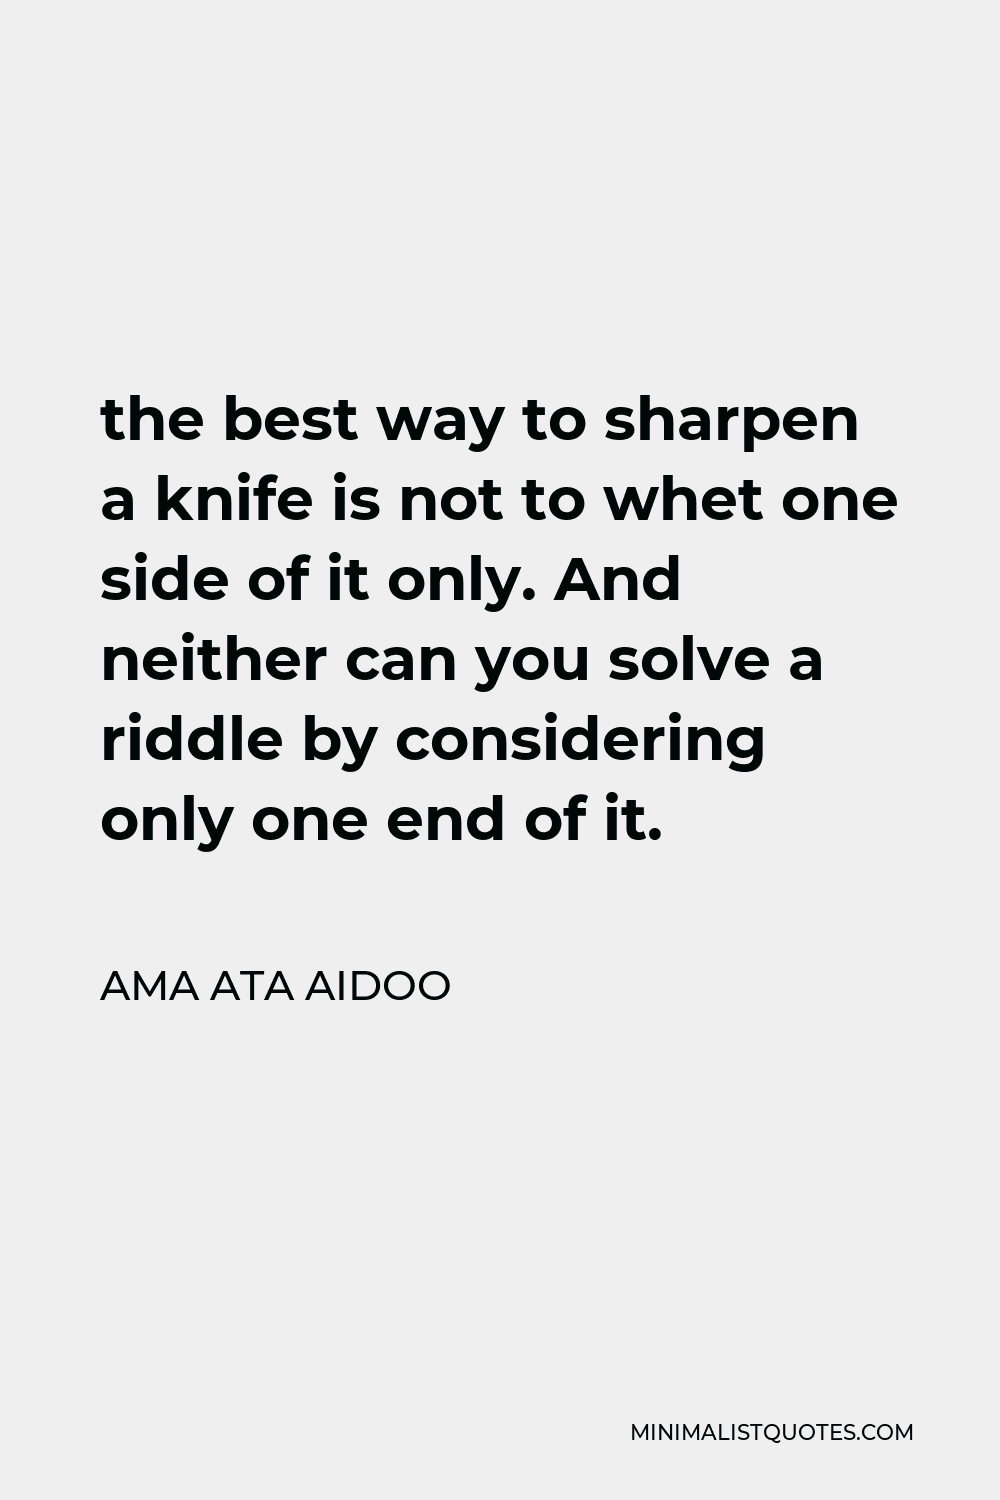 Ama Ata Aidoo Quote - the best way to sharpen a knife is not to whet one side of it only. And neither can you solve a riddle by considering only one end of it.